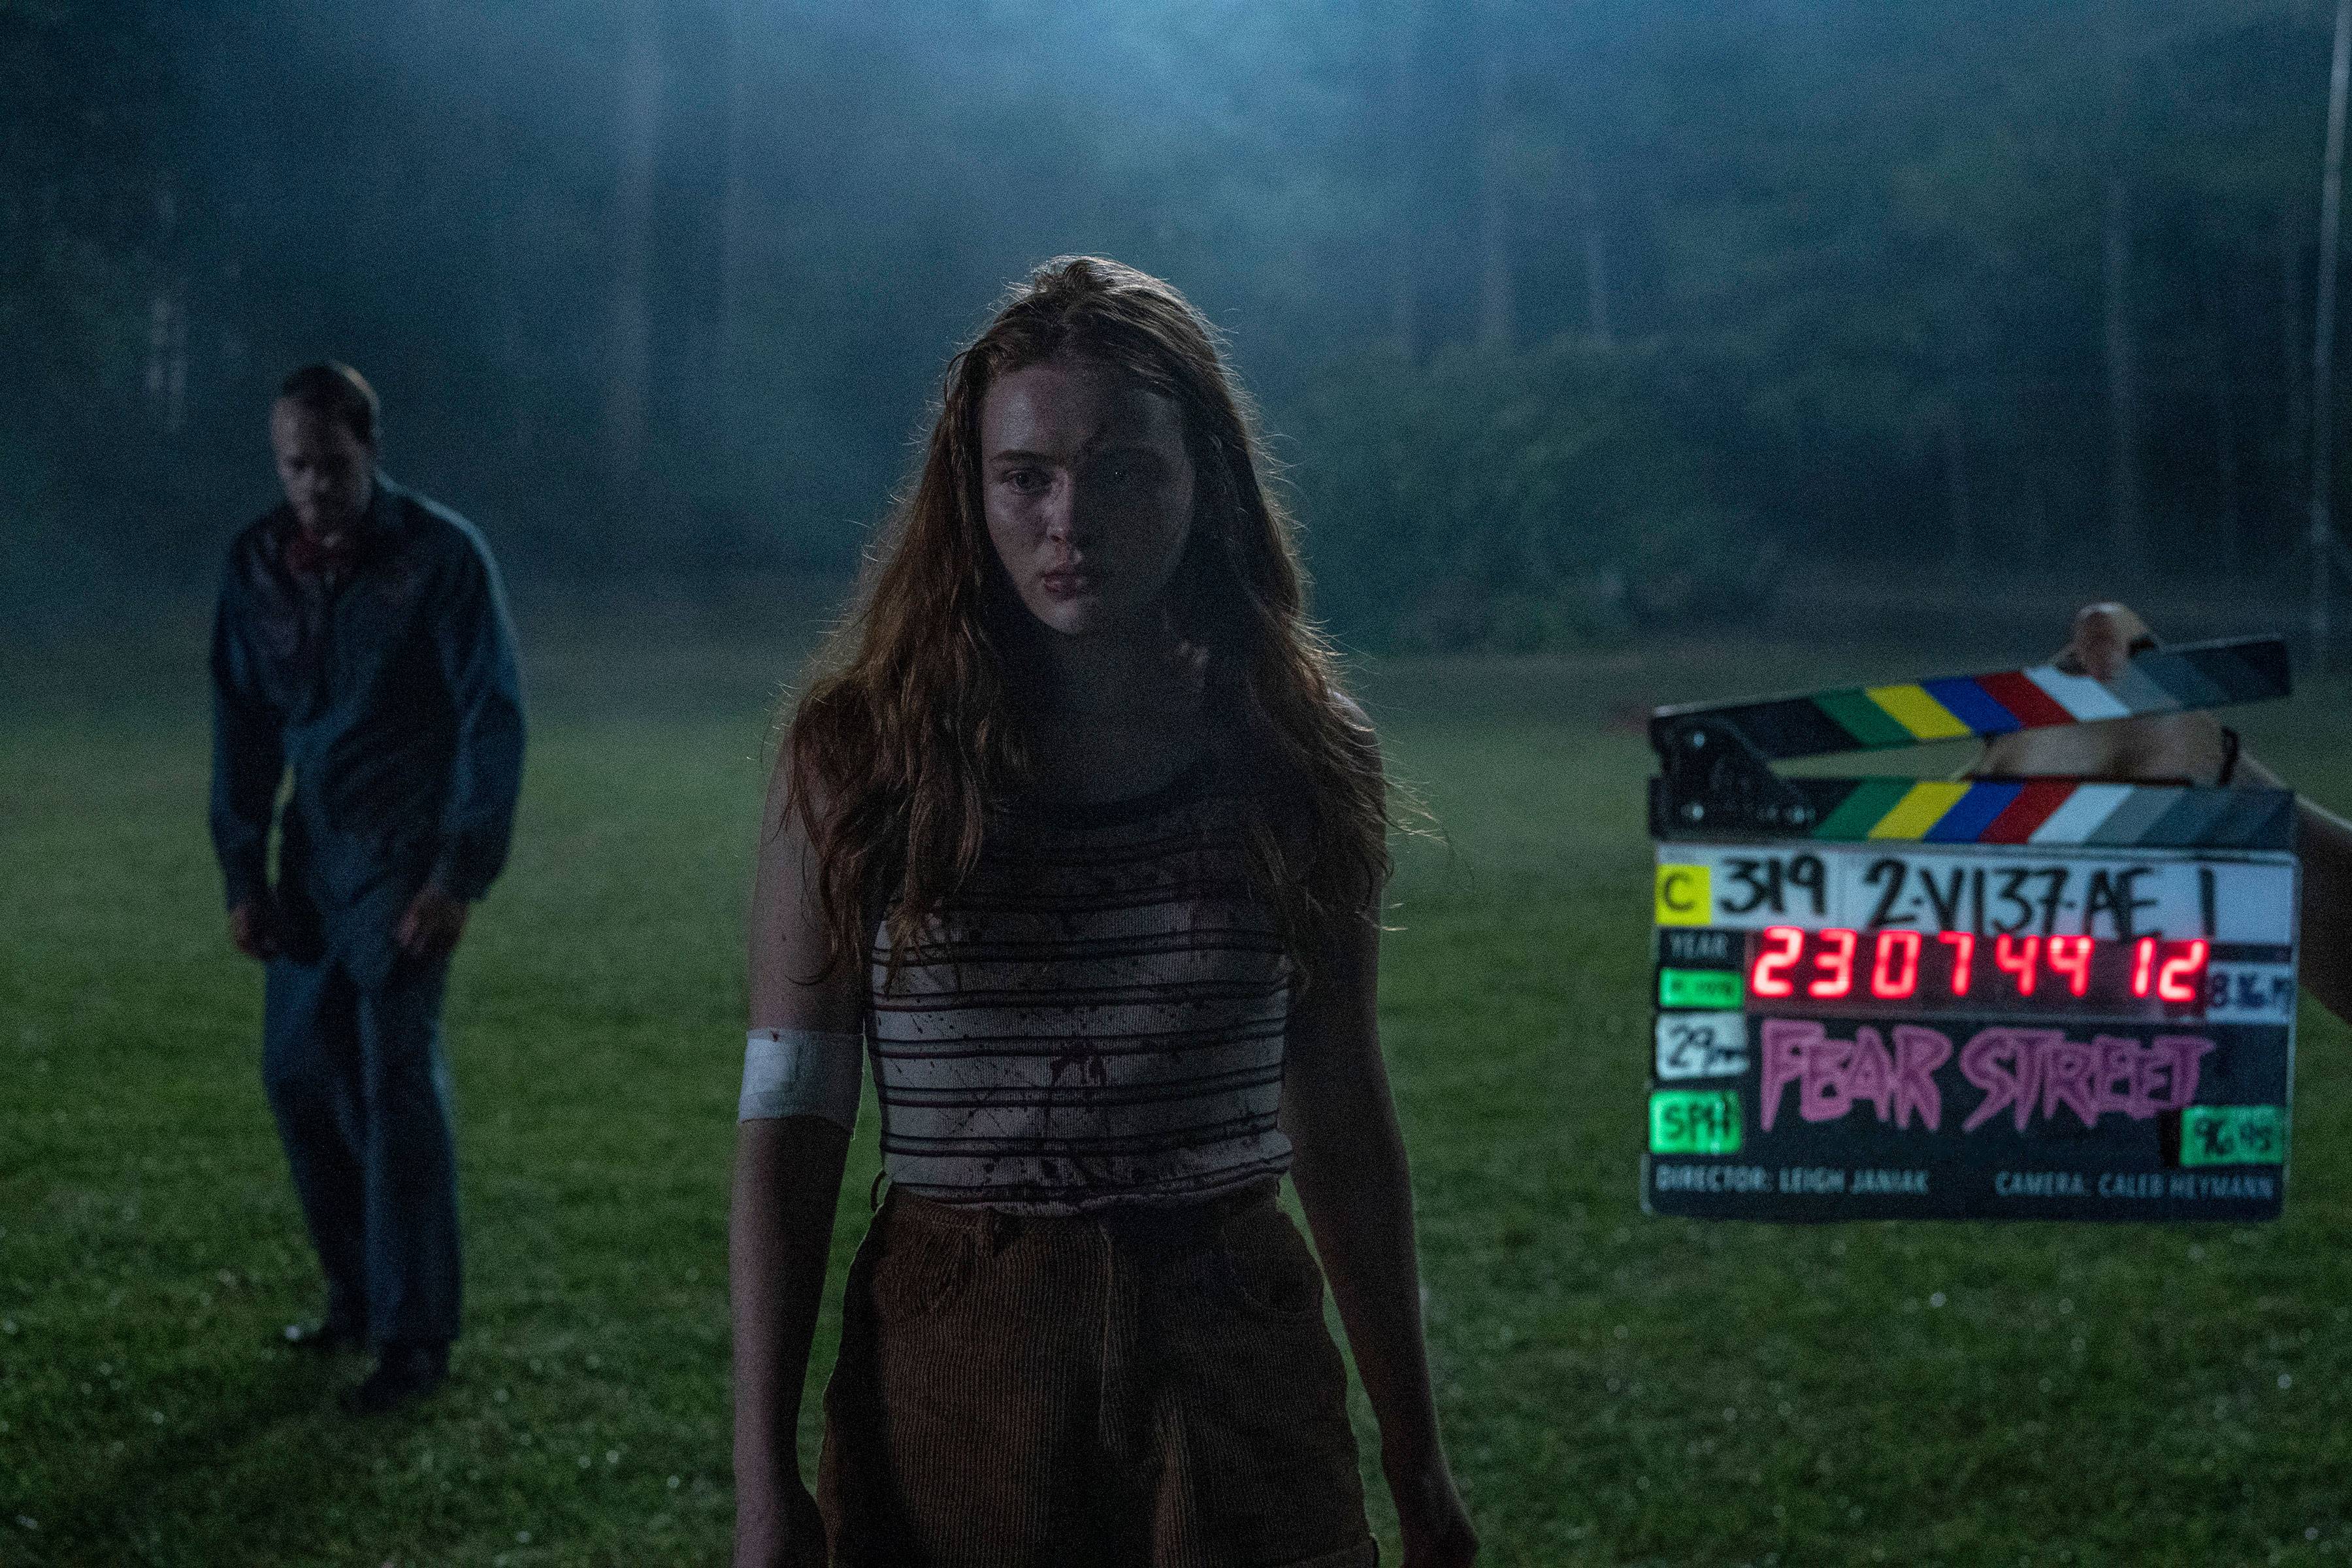 Sadie Sink Fear Street: Photos, videos and related news